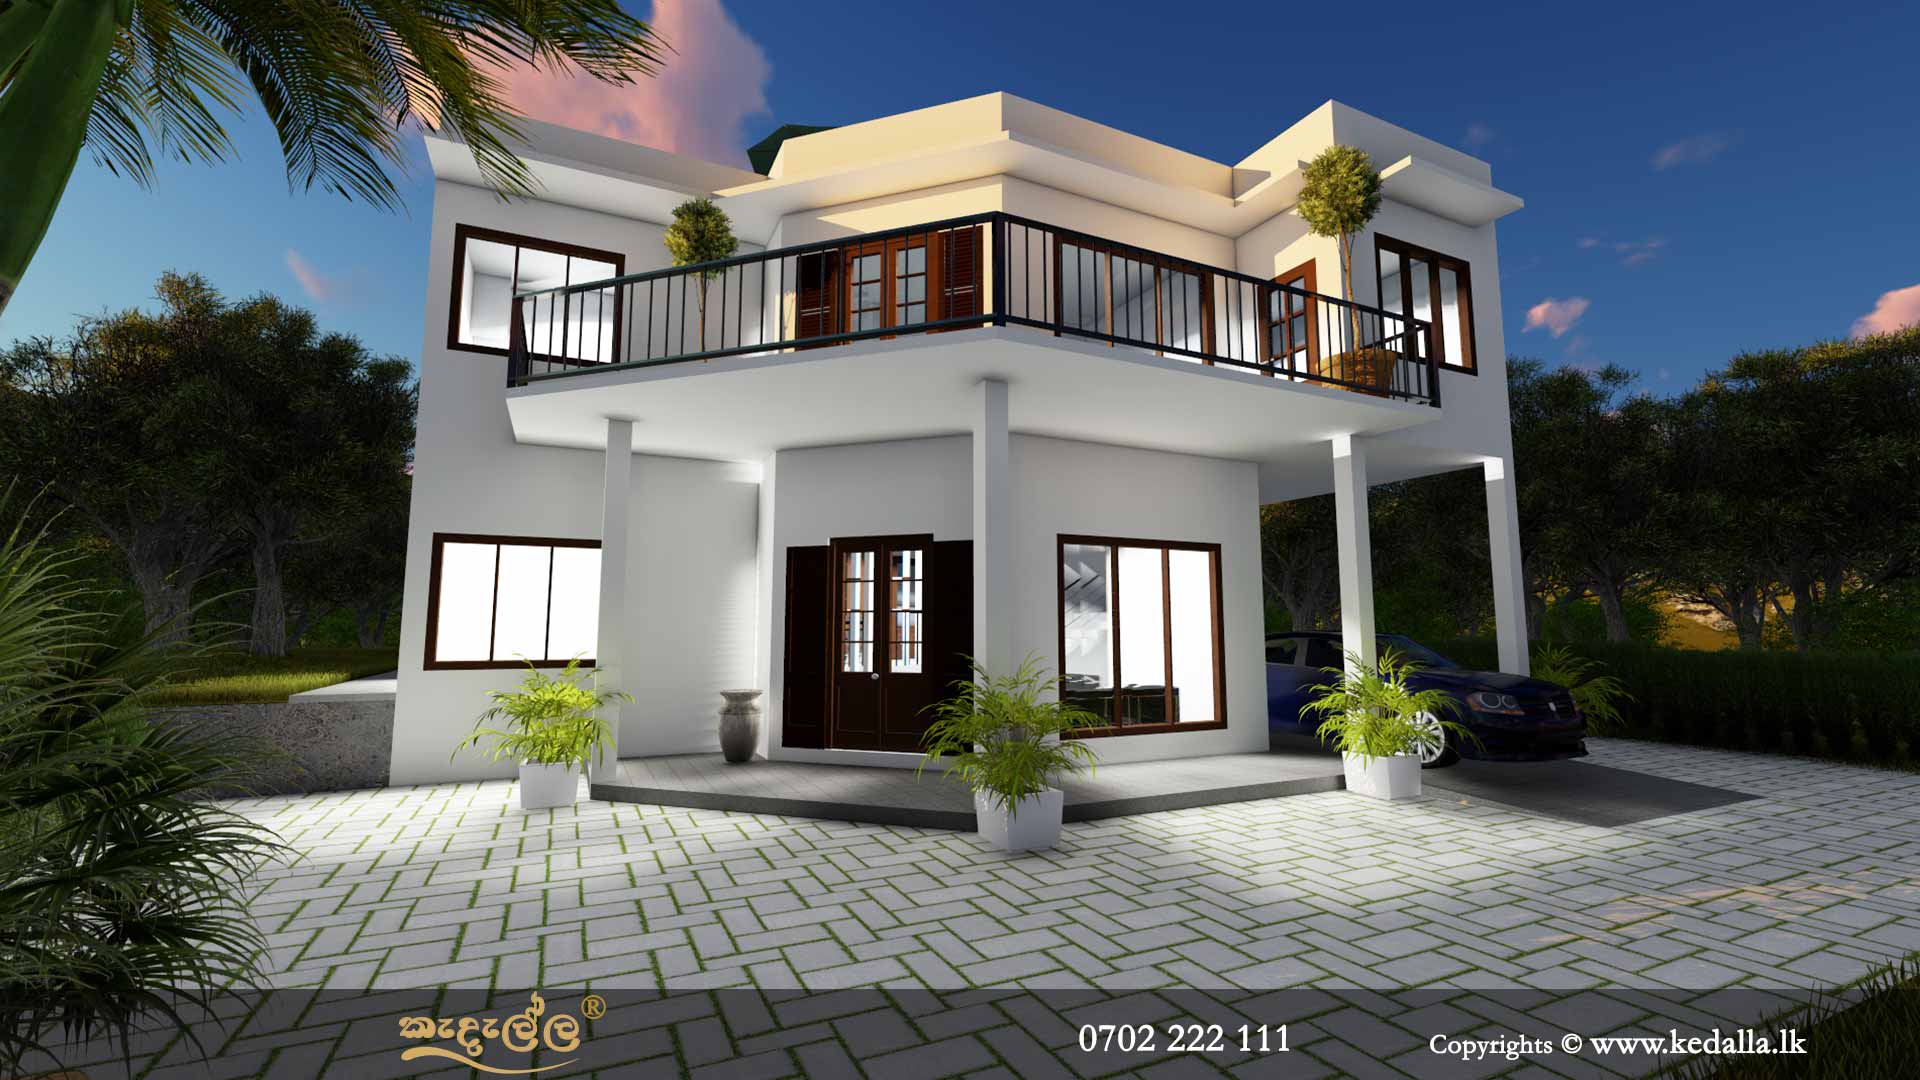 Contemporary house designs/Modern house plans along with beautiful architectural concept designs in Kandy sri lanka